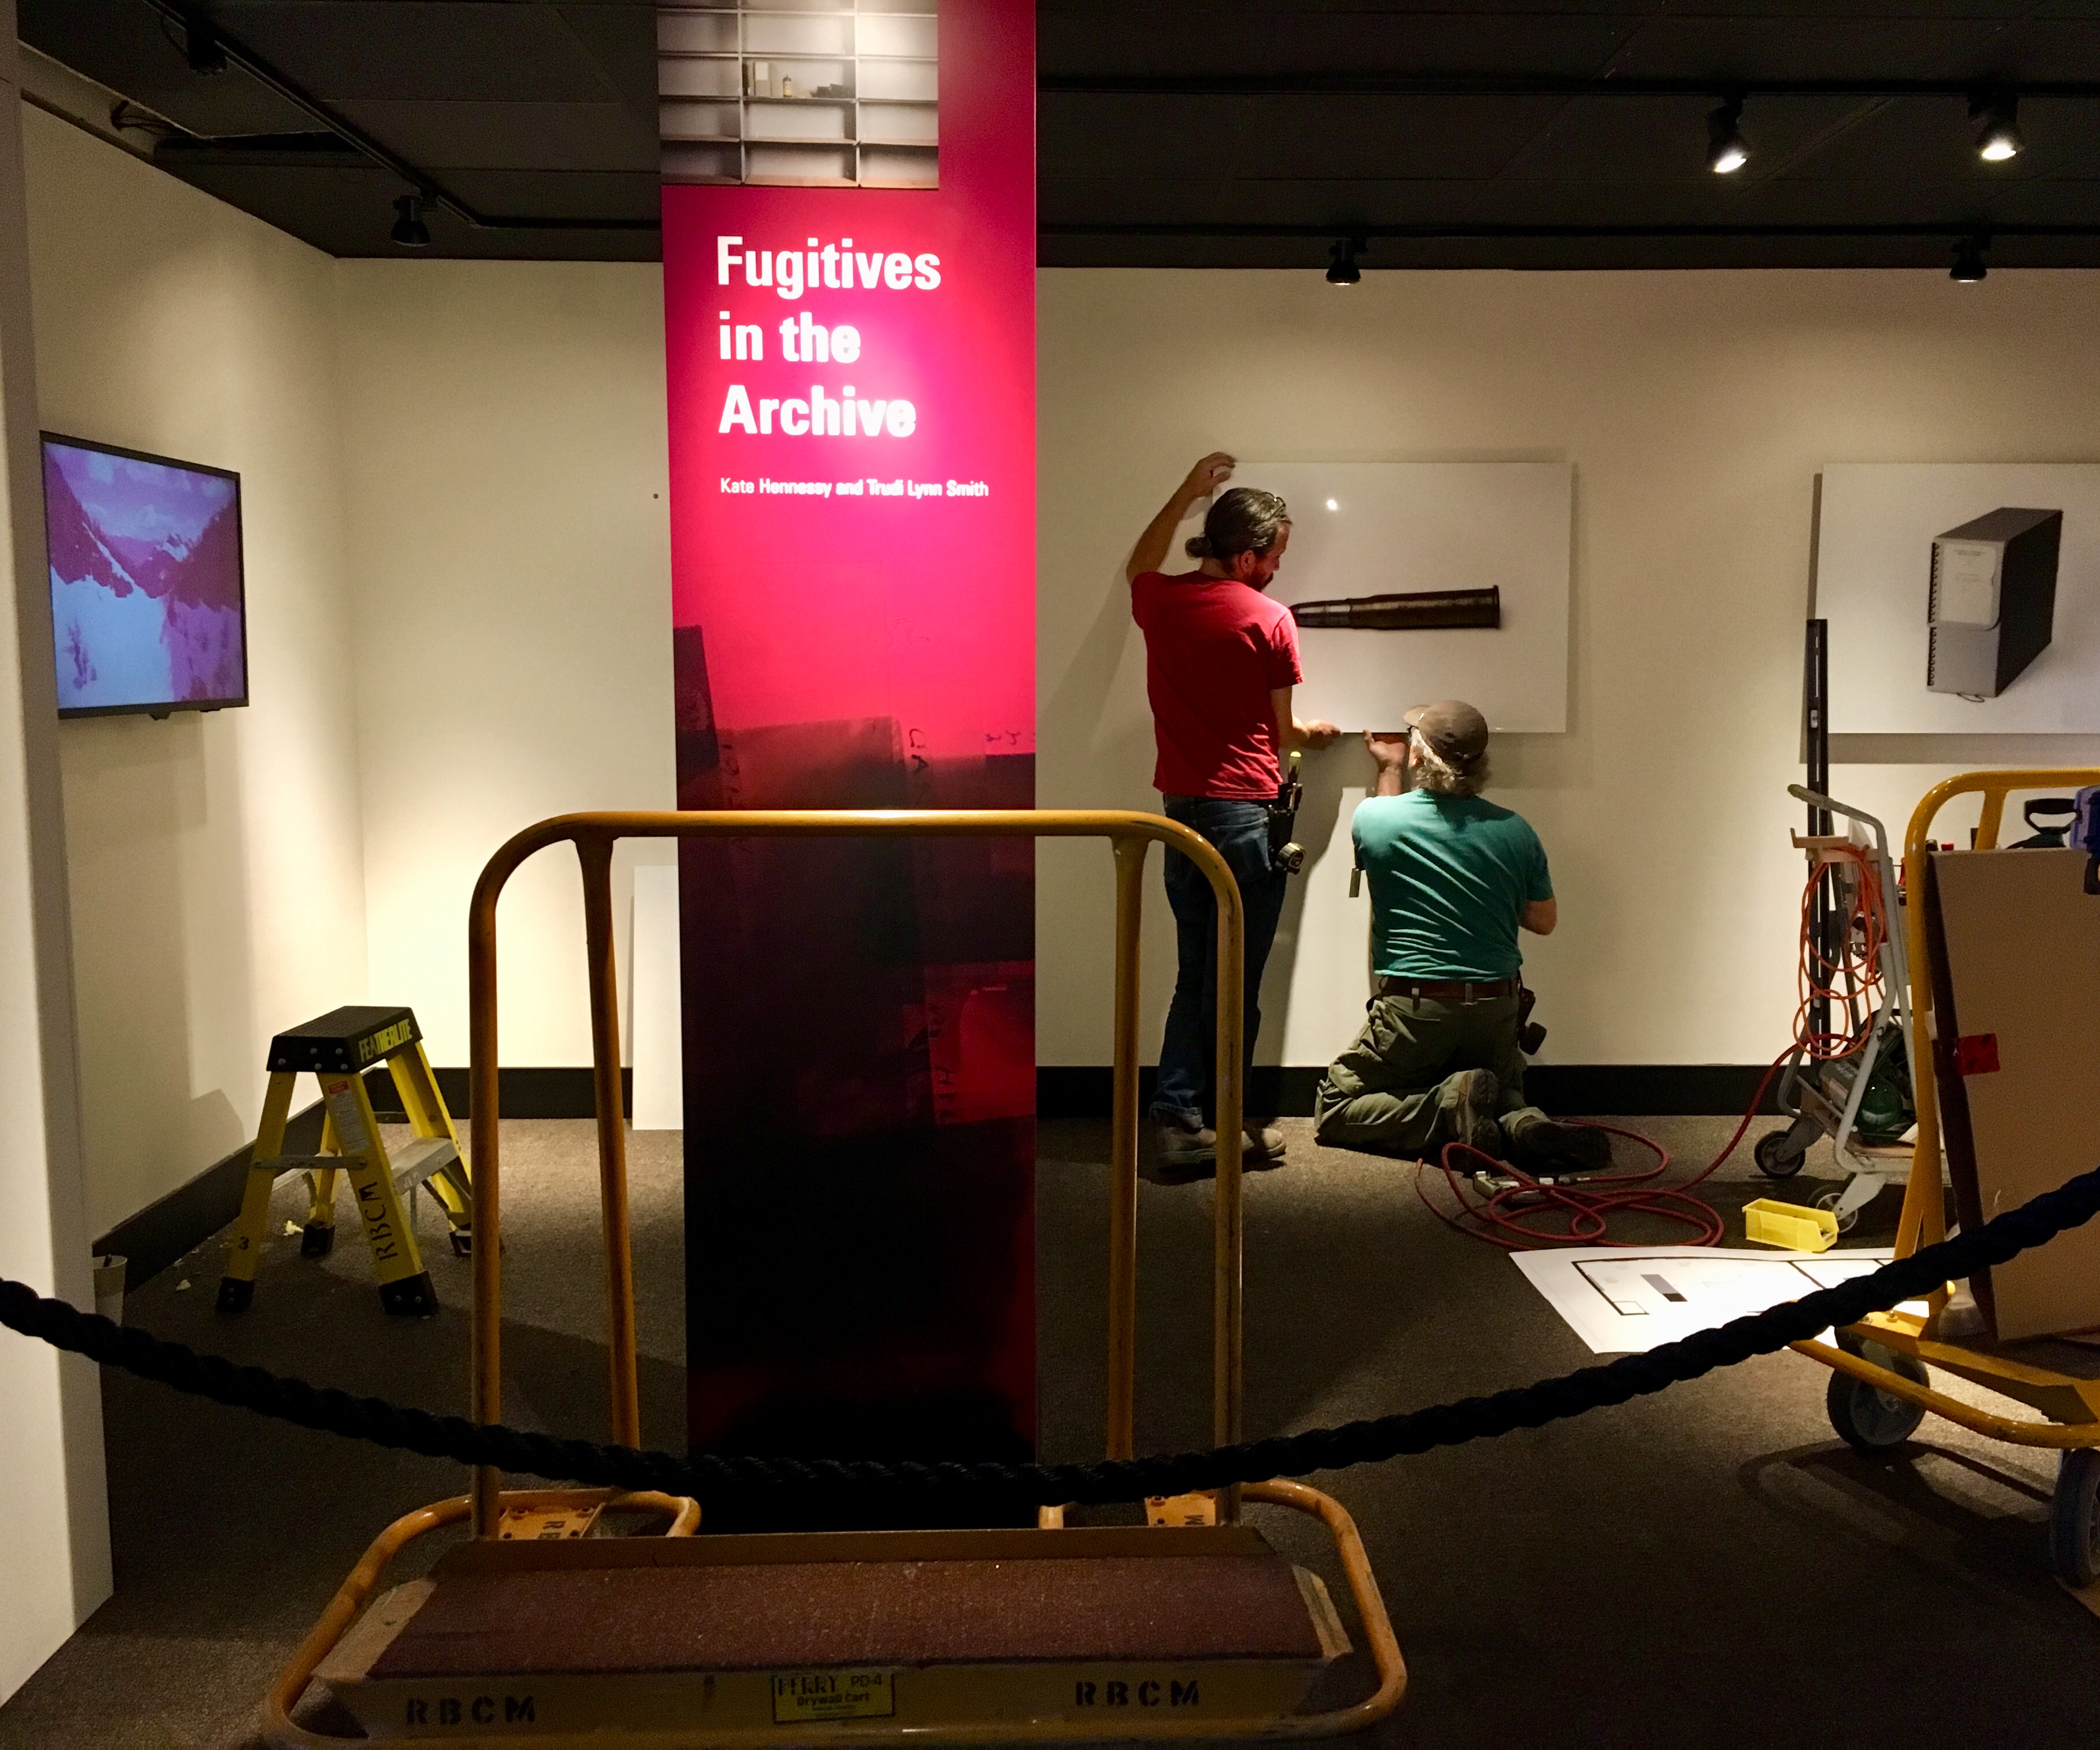 Photograph showing the installation of the exhibition Fugitives in the Archive, at the Royal BC Museum